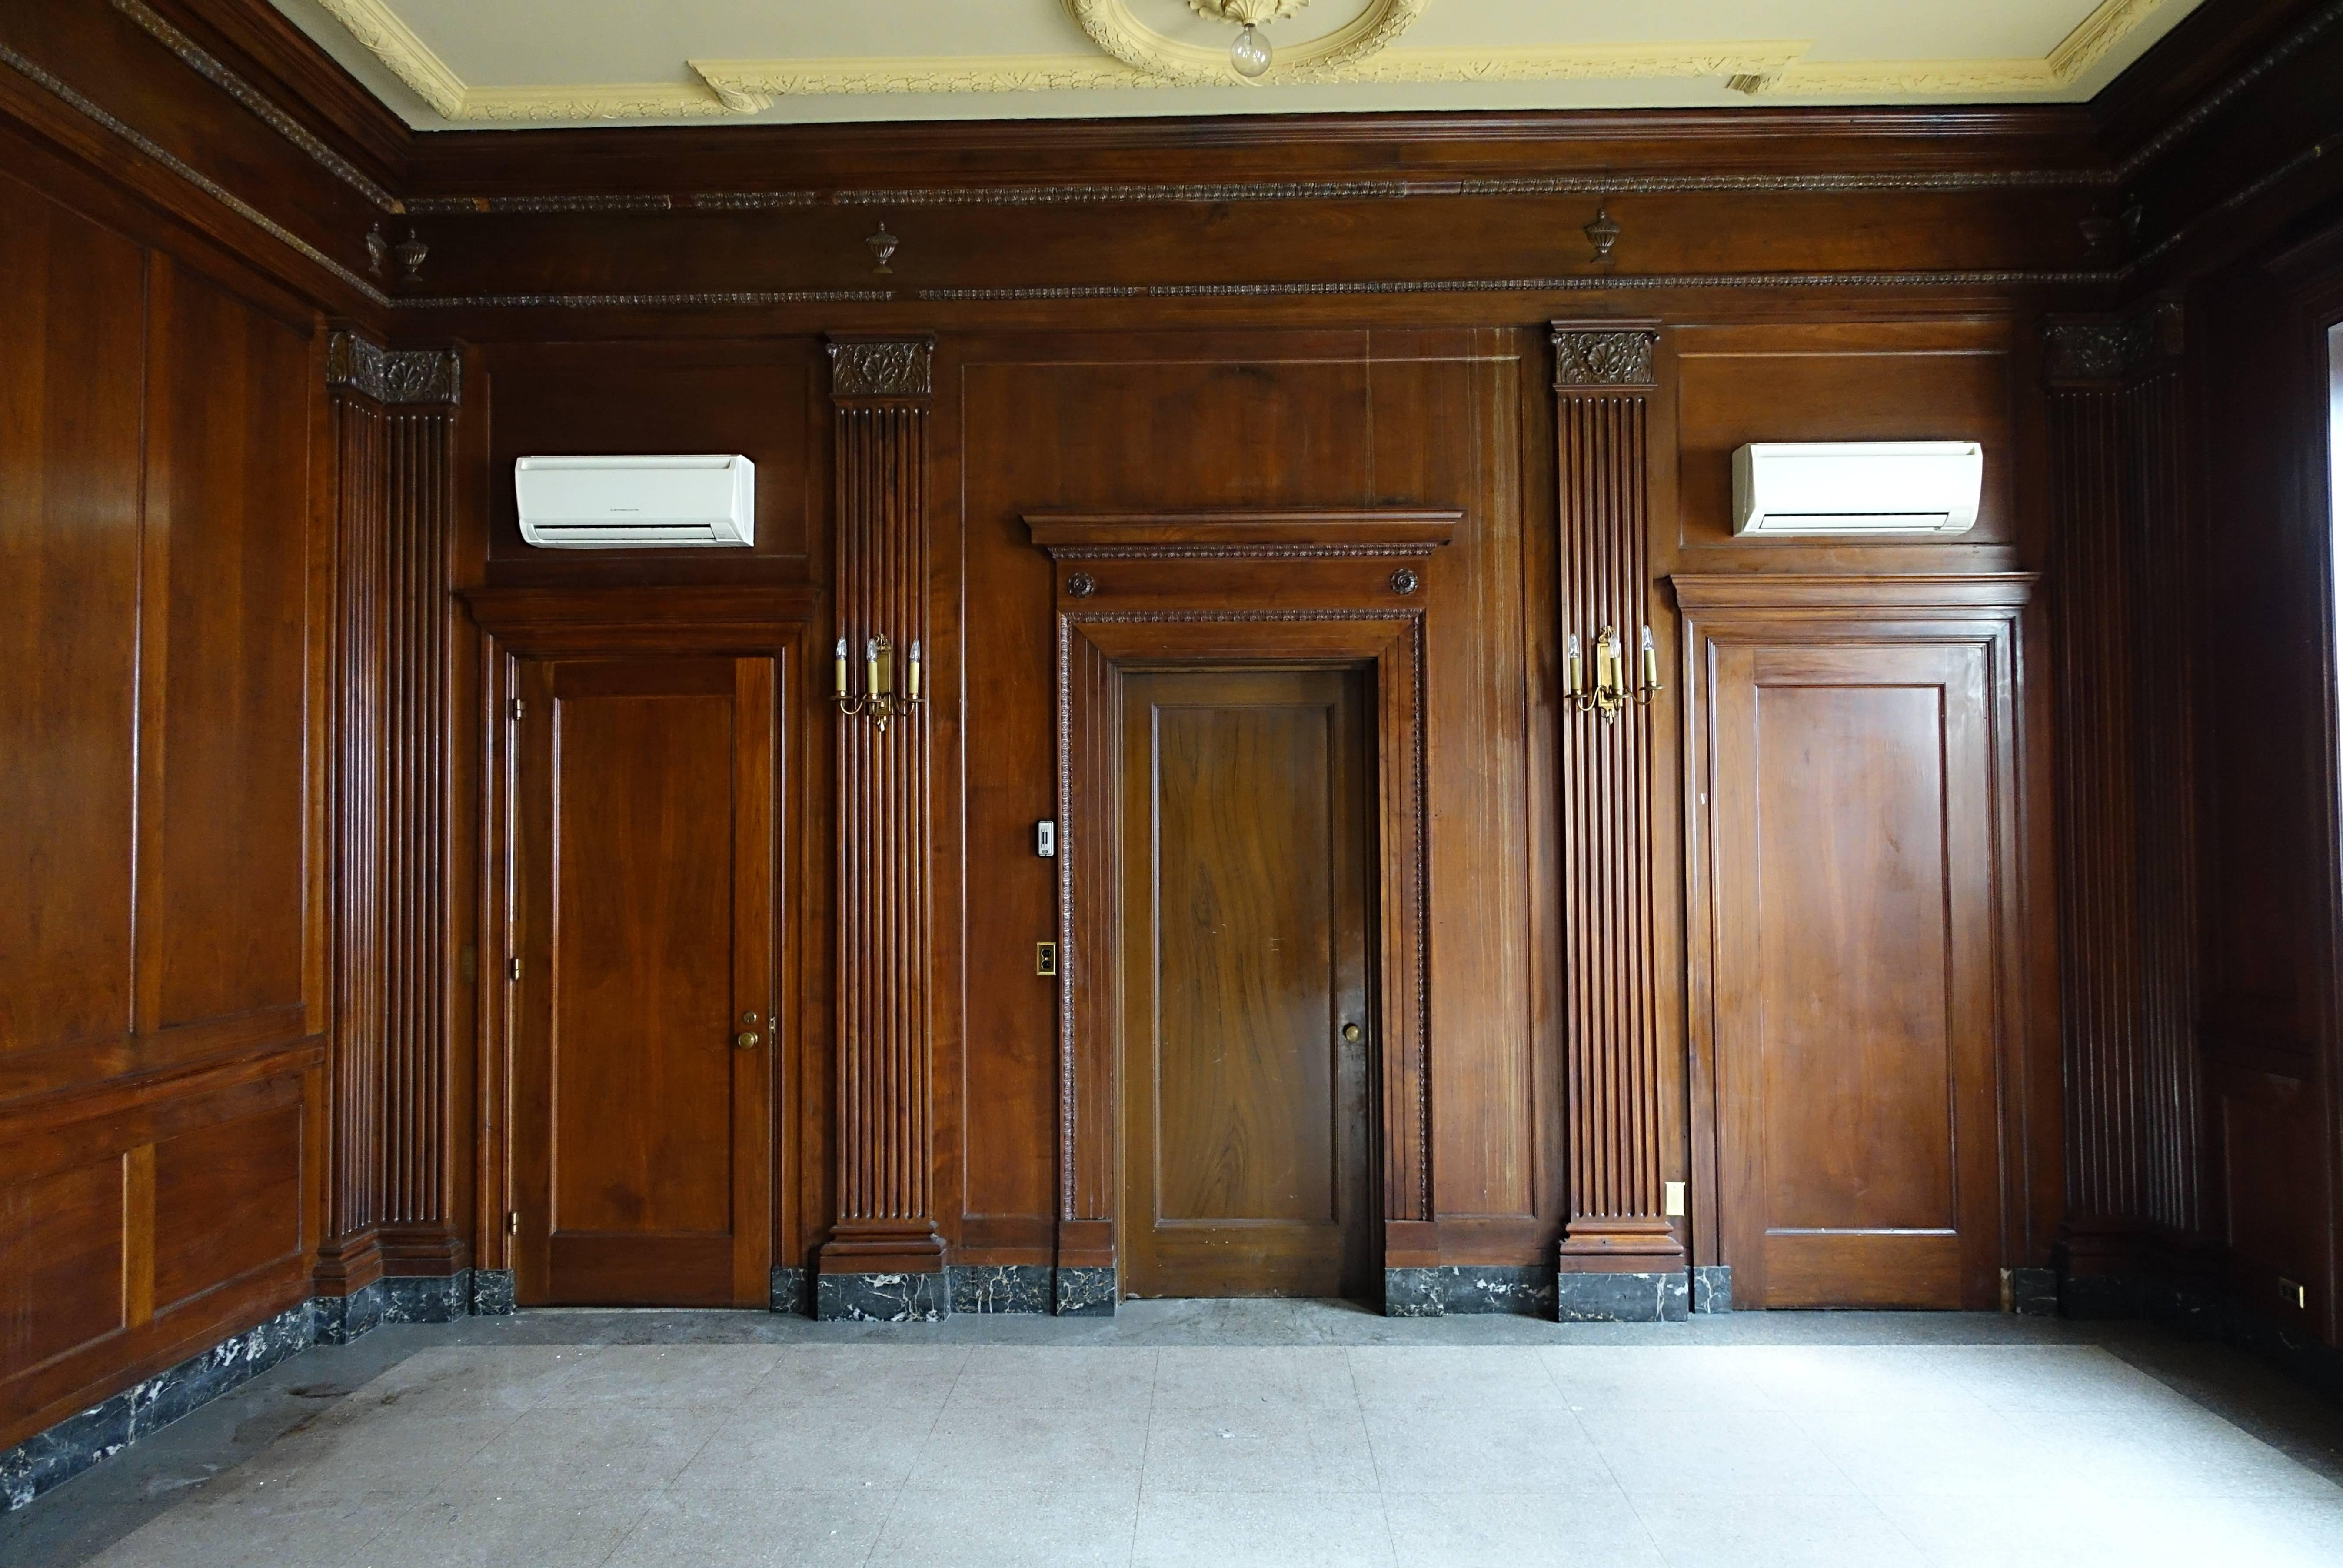 Solid walnut panels from the negotiating room of the prominent Williamsburg Savings Bank in Brooklyn, New York. The neoclassical building was erected in 1928. The room has one longer side with full panelling divided by four ornate fluted pilasters.